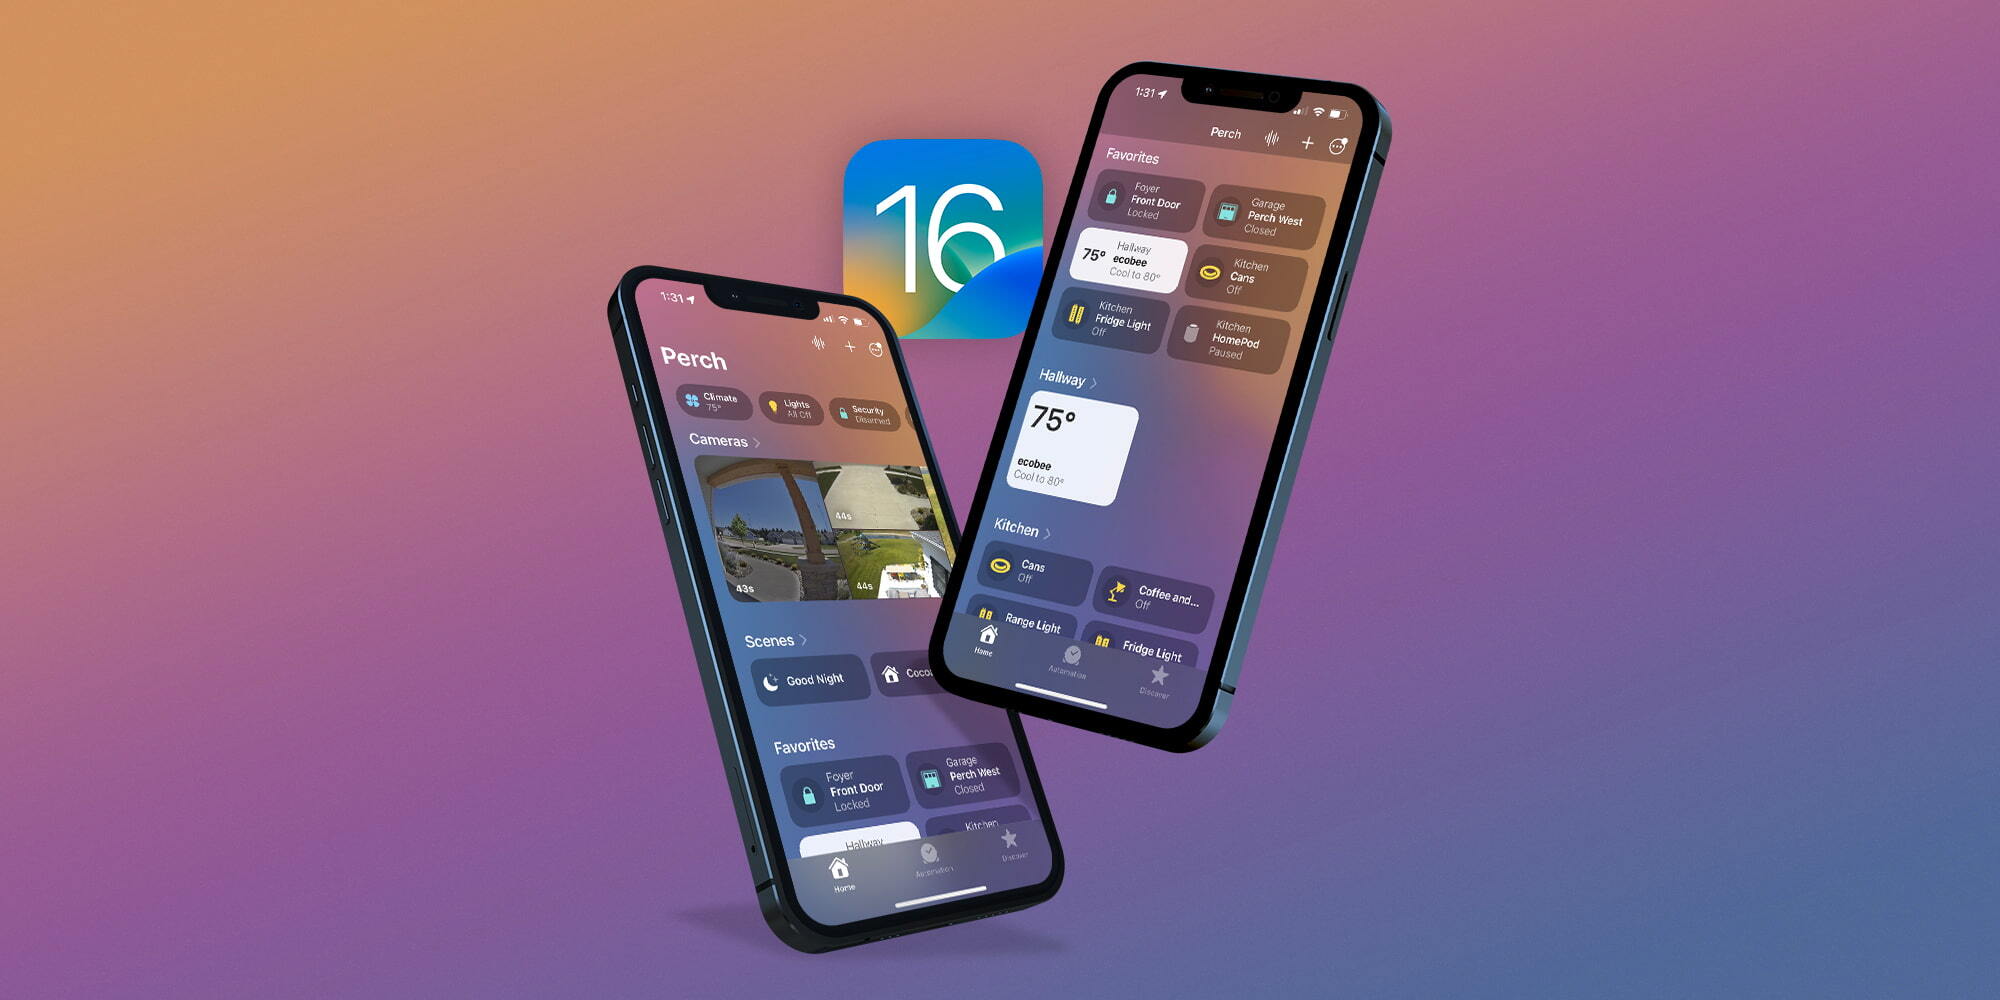 When will iOS 16 arrive - the new Home app